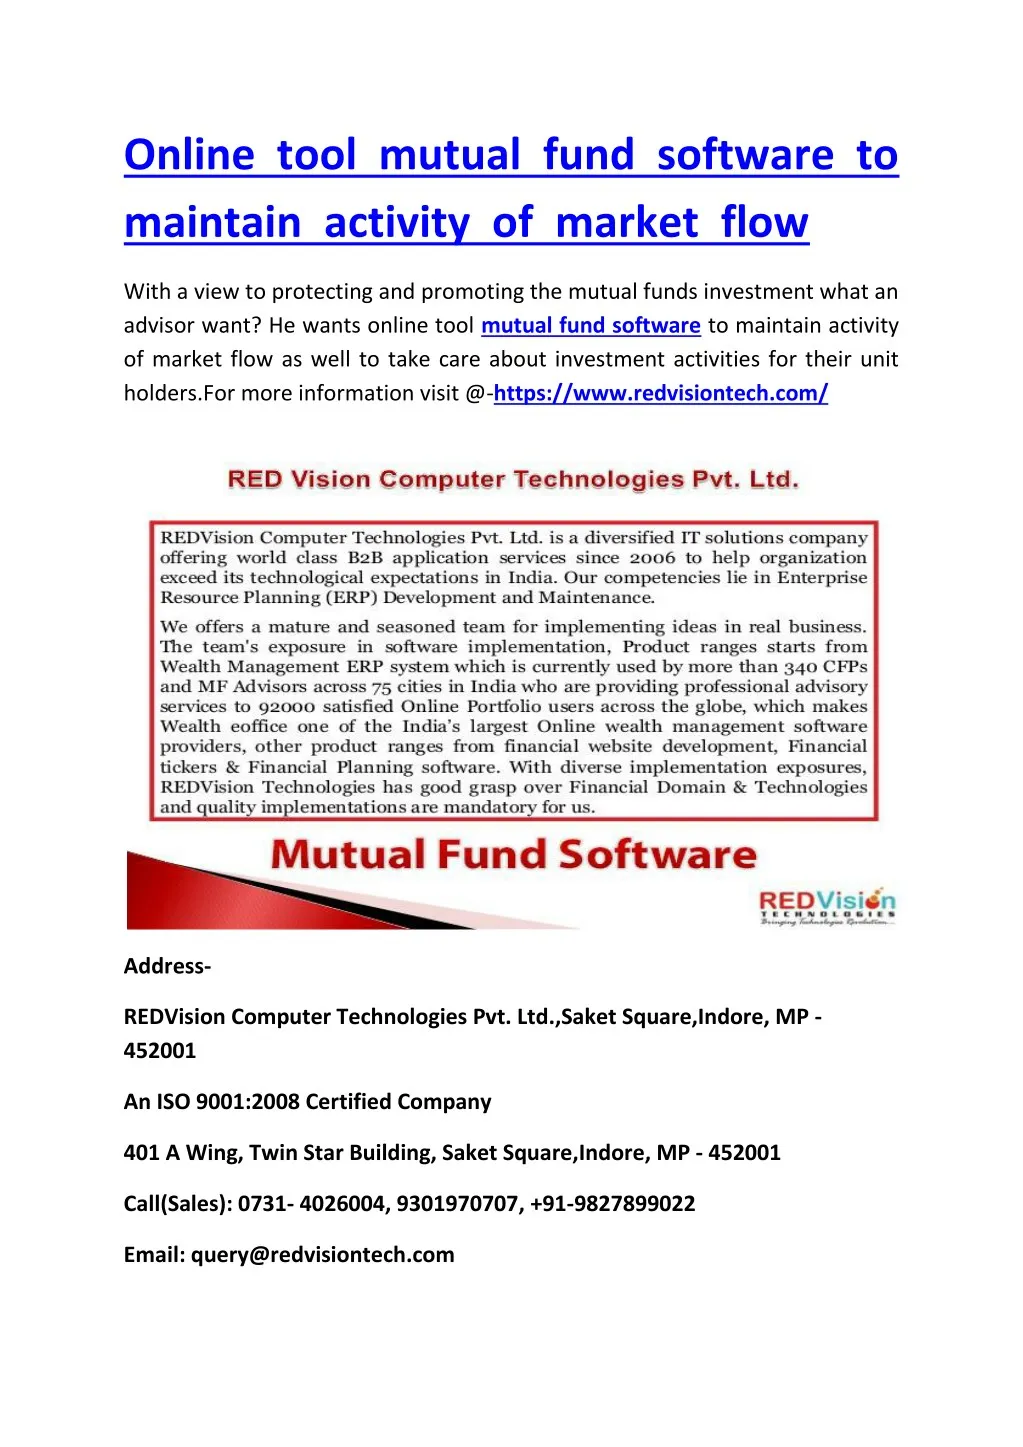 online tool mutual fund software to maintain